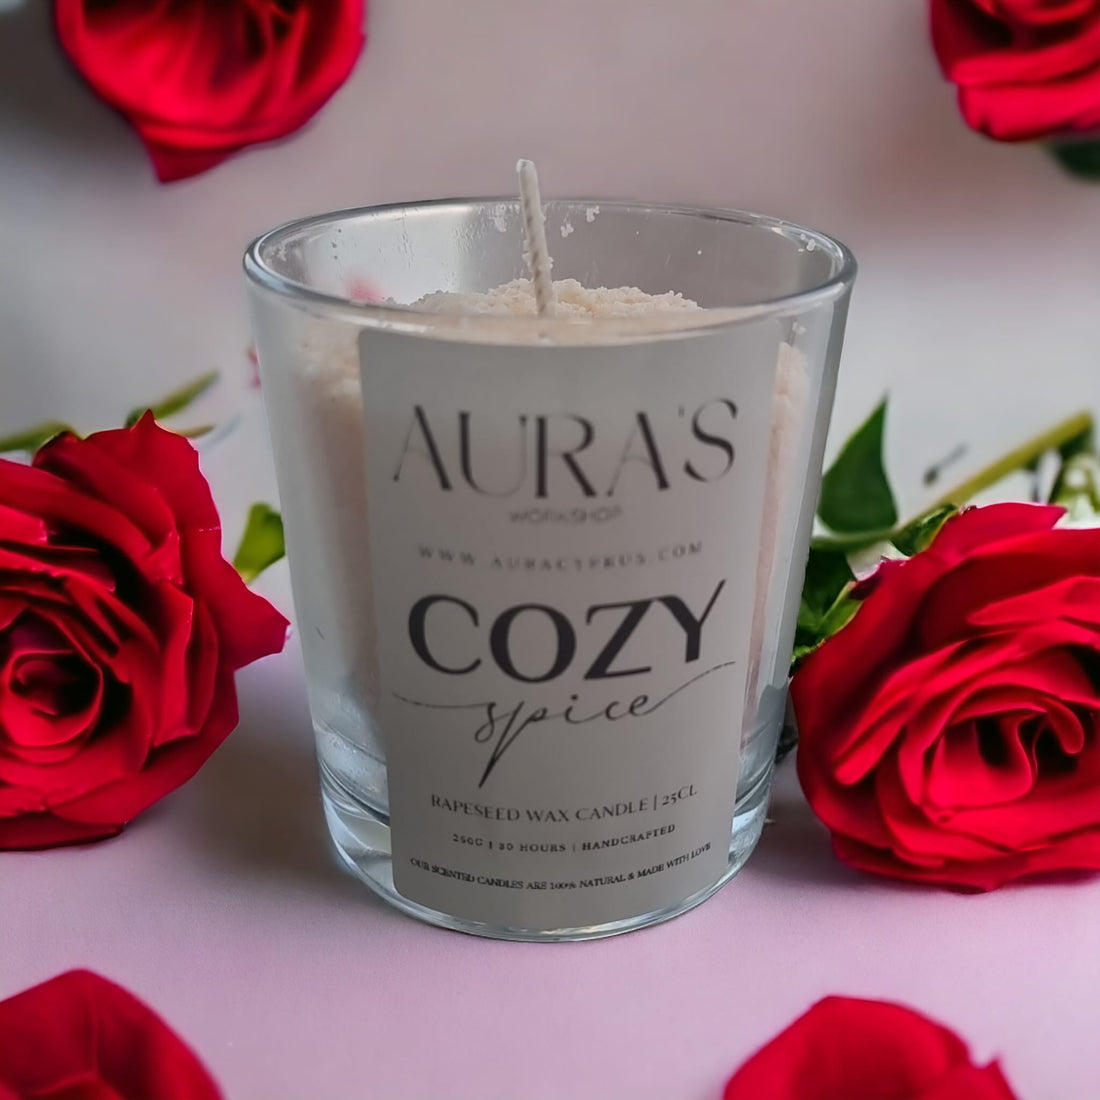 Candles Cyprus: Experience Purity with Aura's Workshop Cyprus Vegan, Nut-Free, Rapeseed Wax Collection